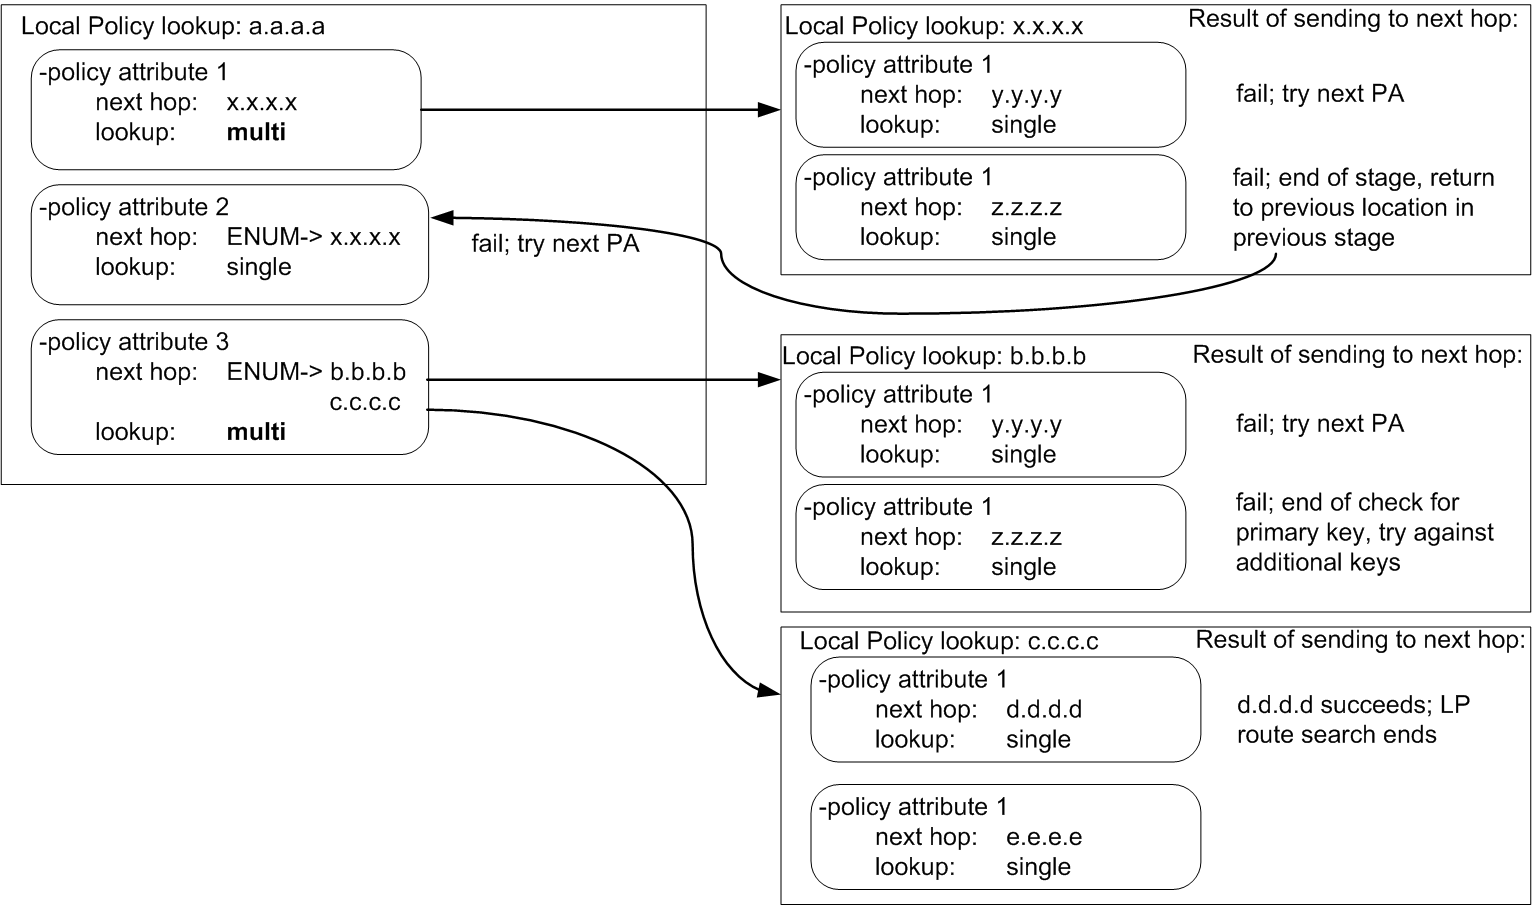 The Multistage Routing example diagram is described above.